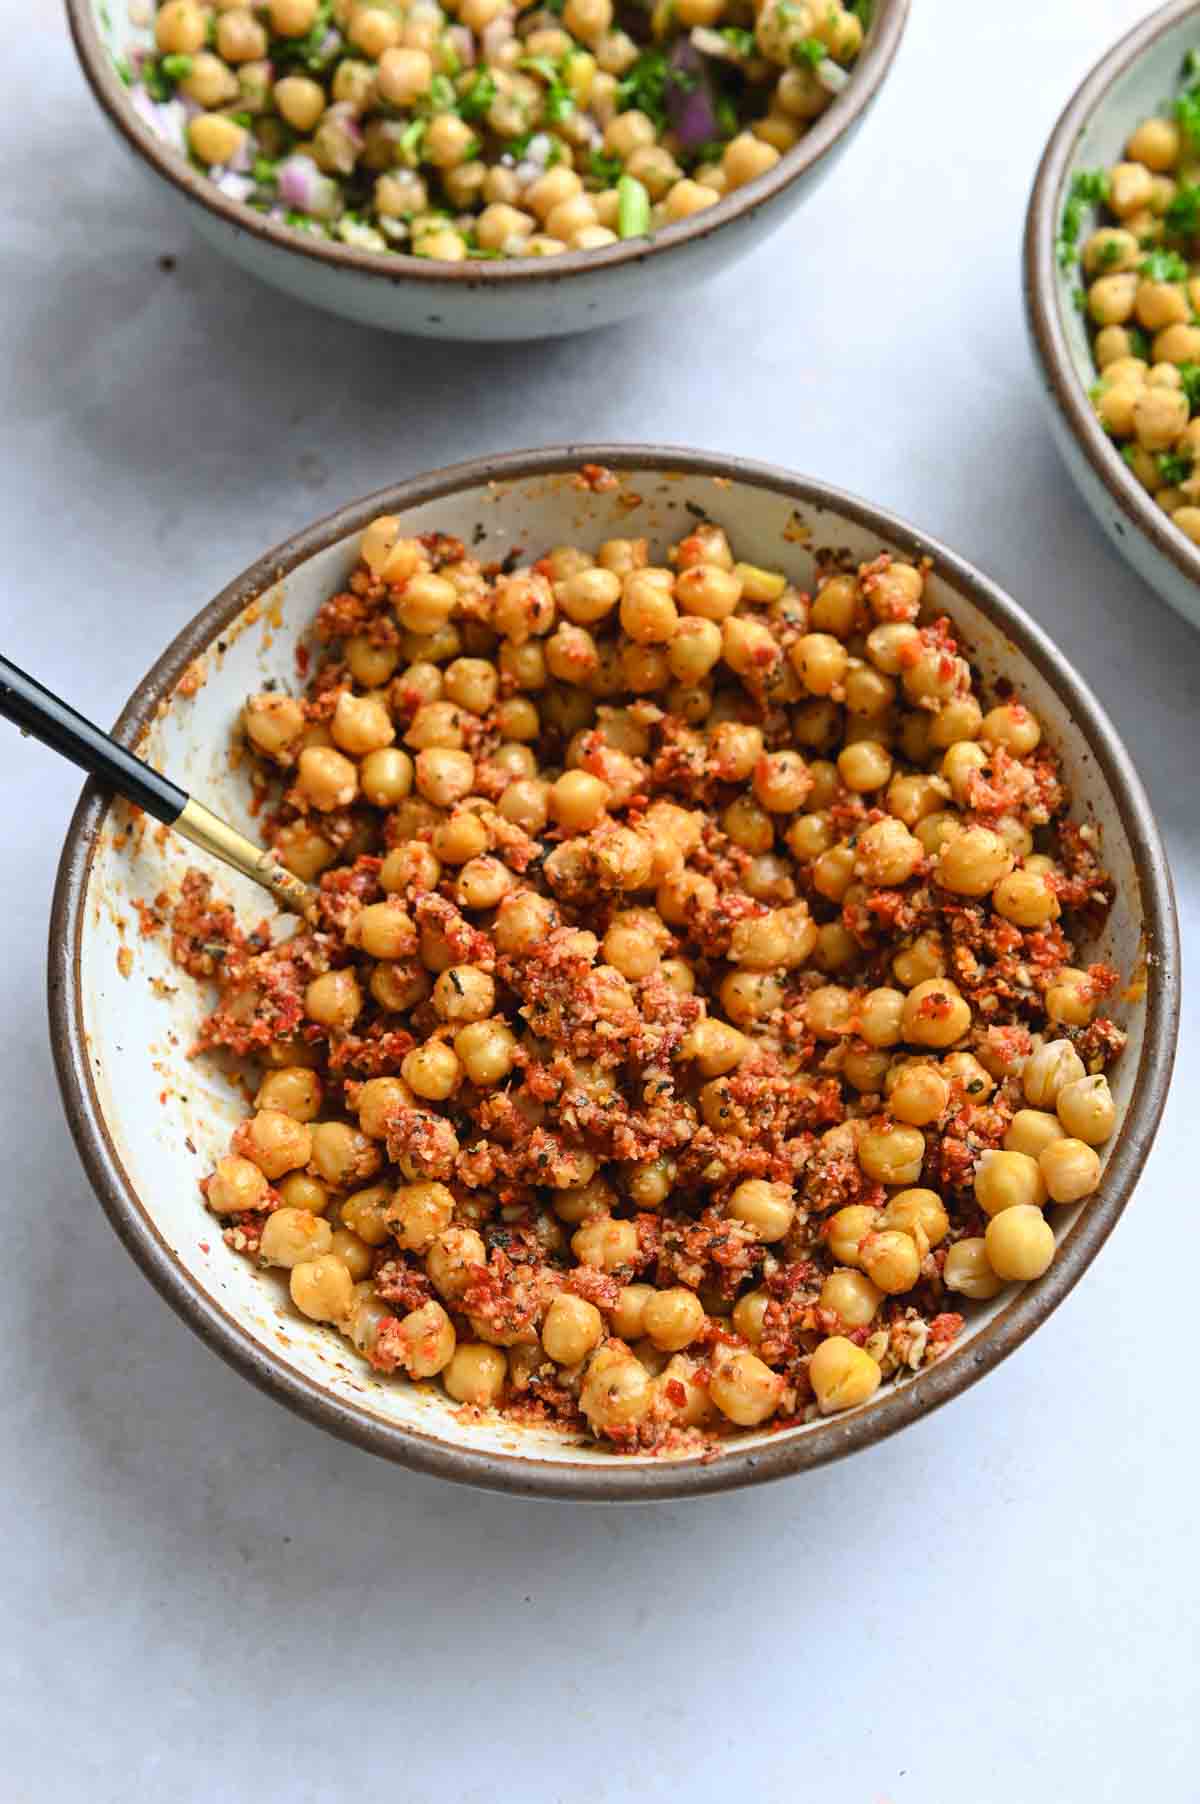 Sun-dried tomato marinated chickpeas in a white bowl.